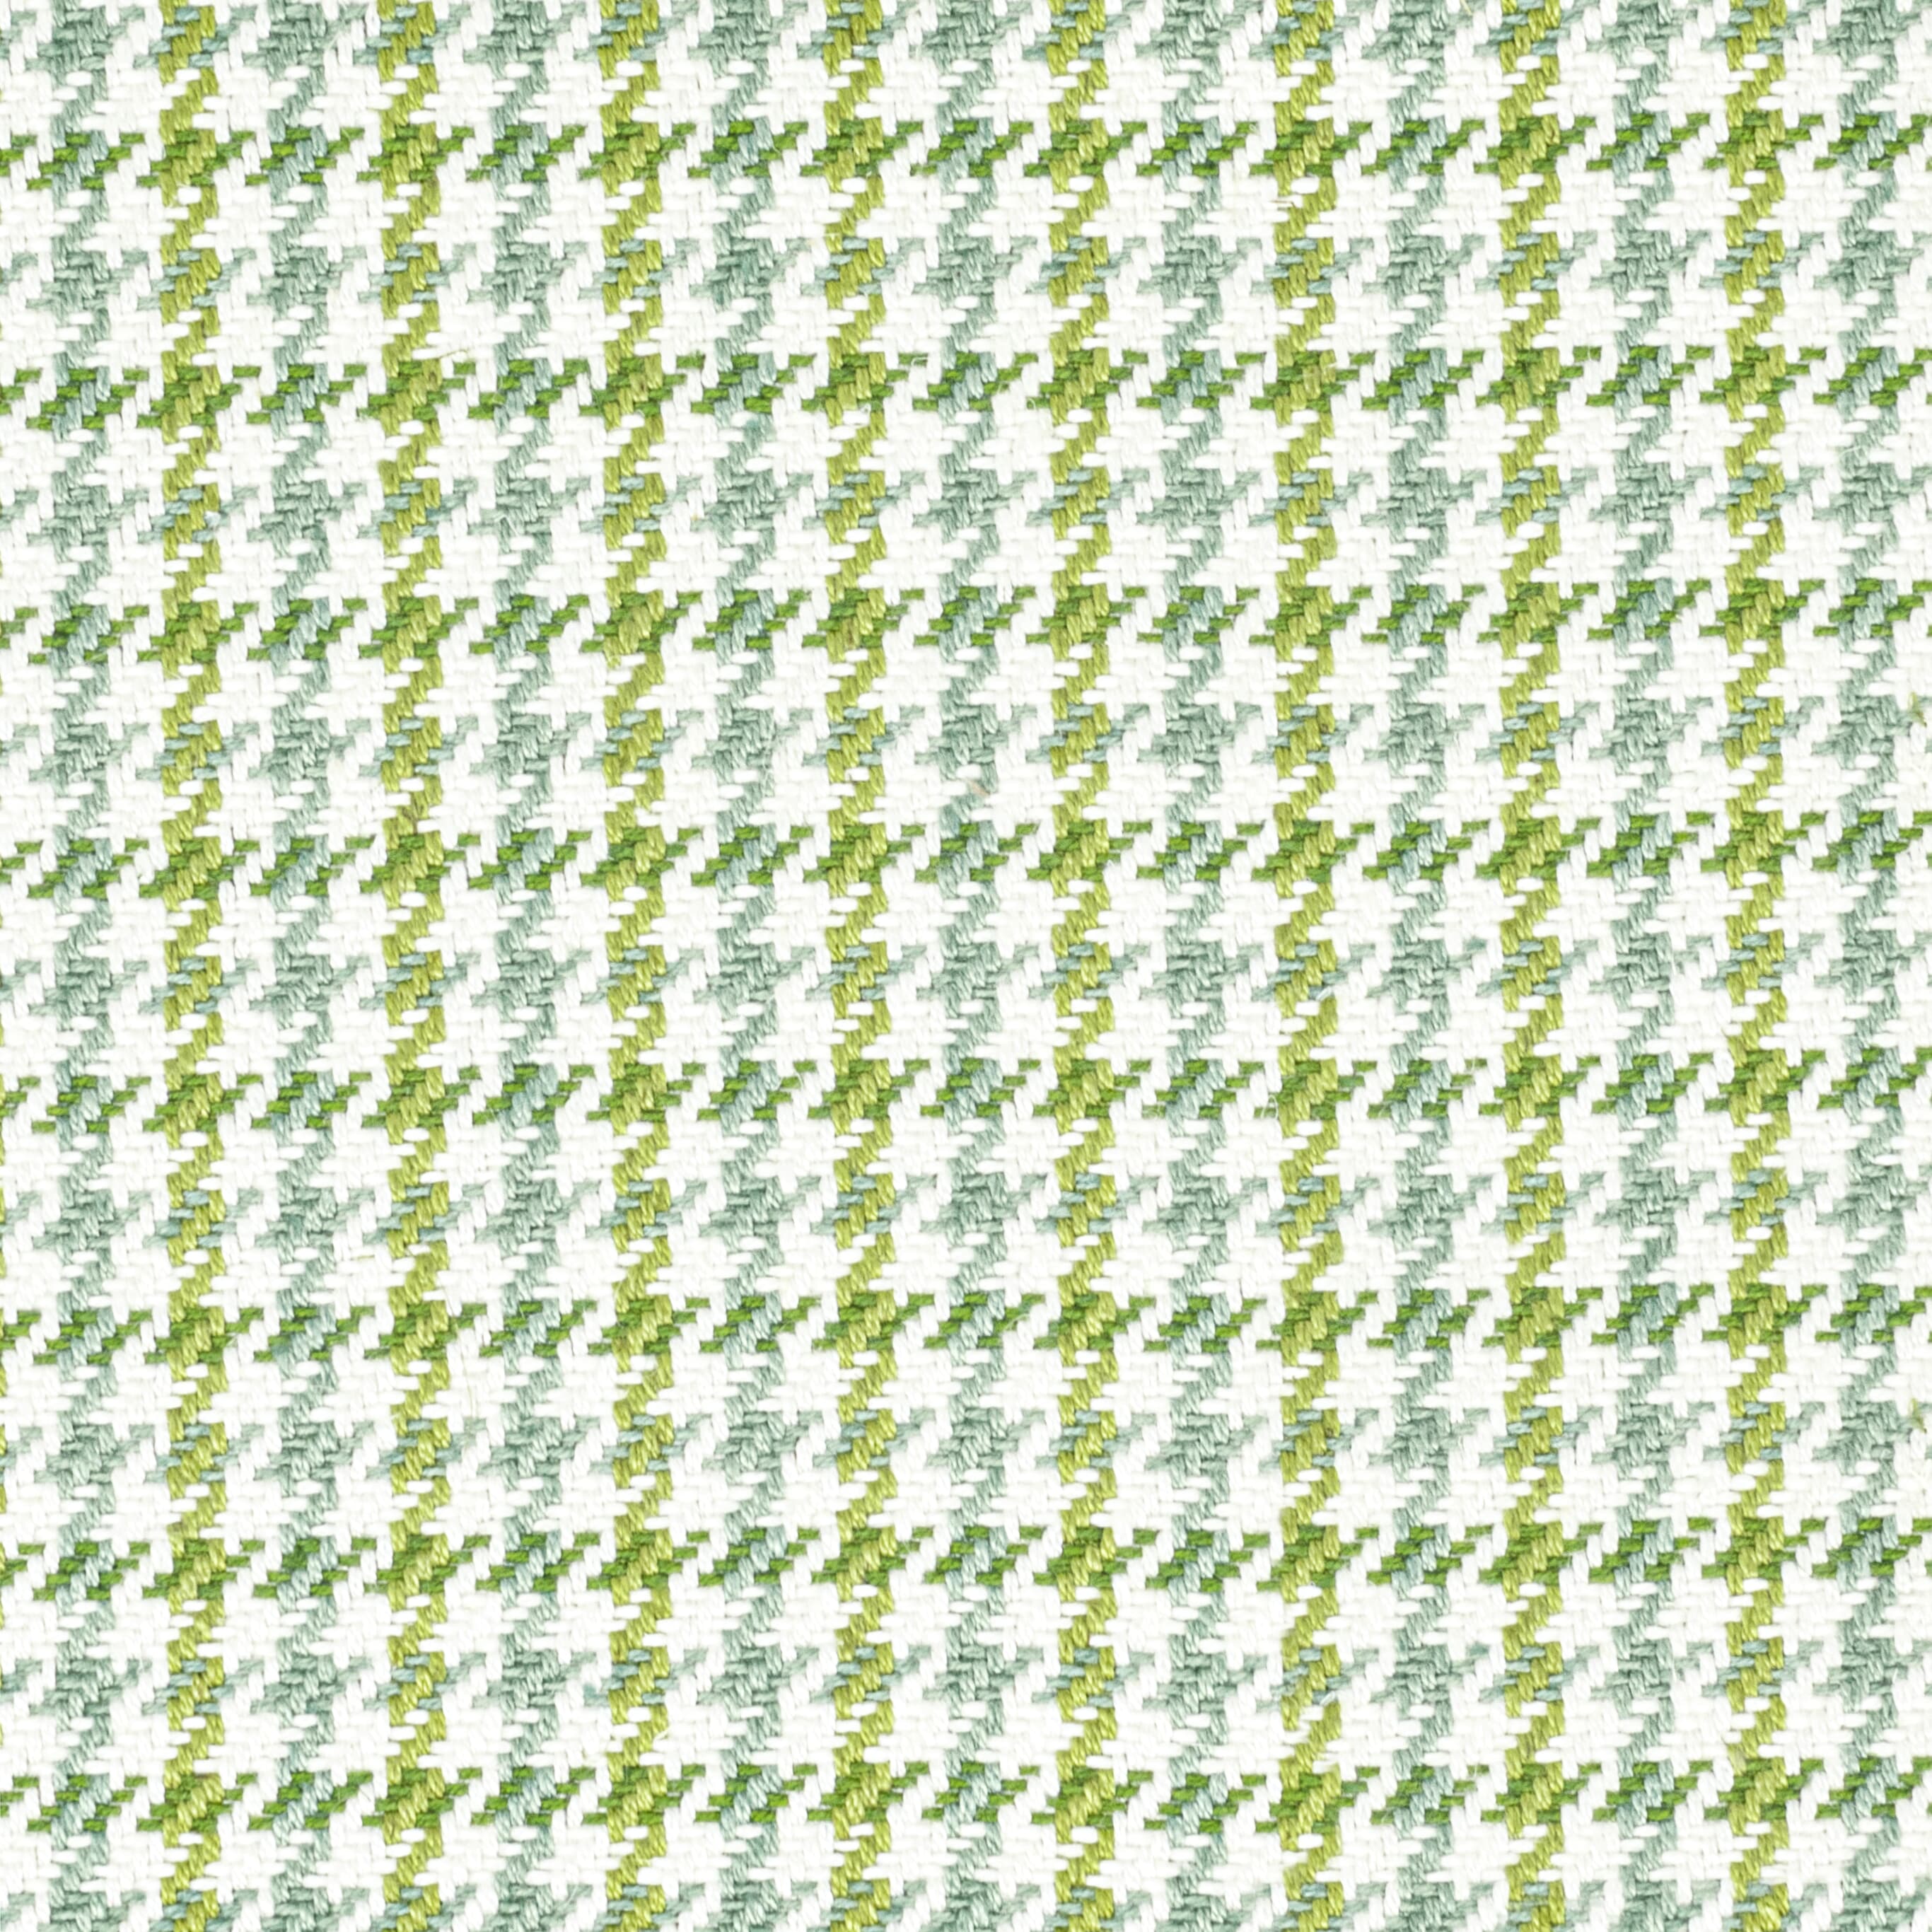 7809-49 Gridlock Seaglass by Stout Fabric